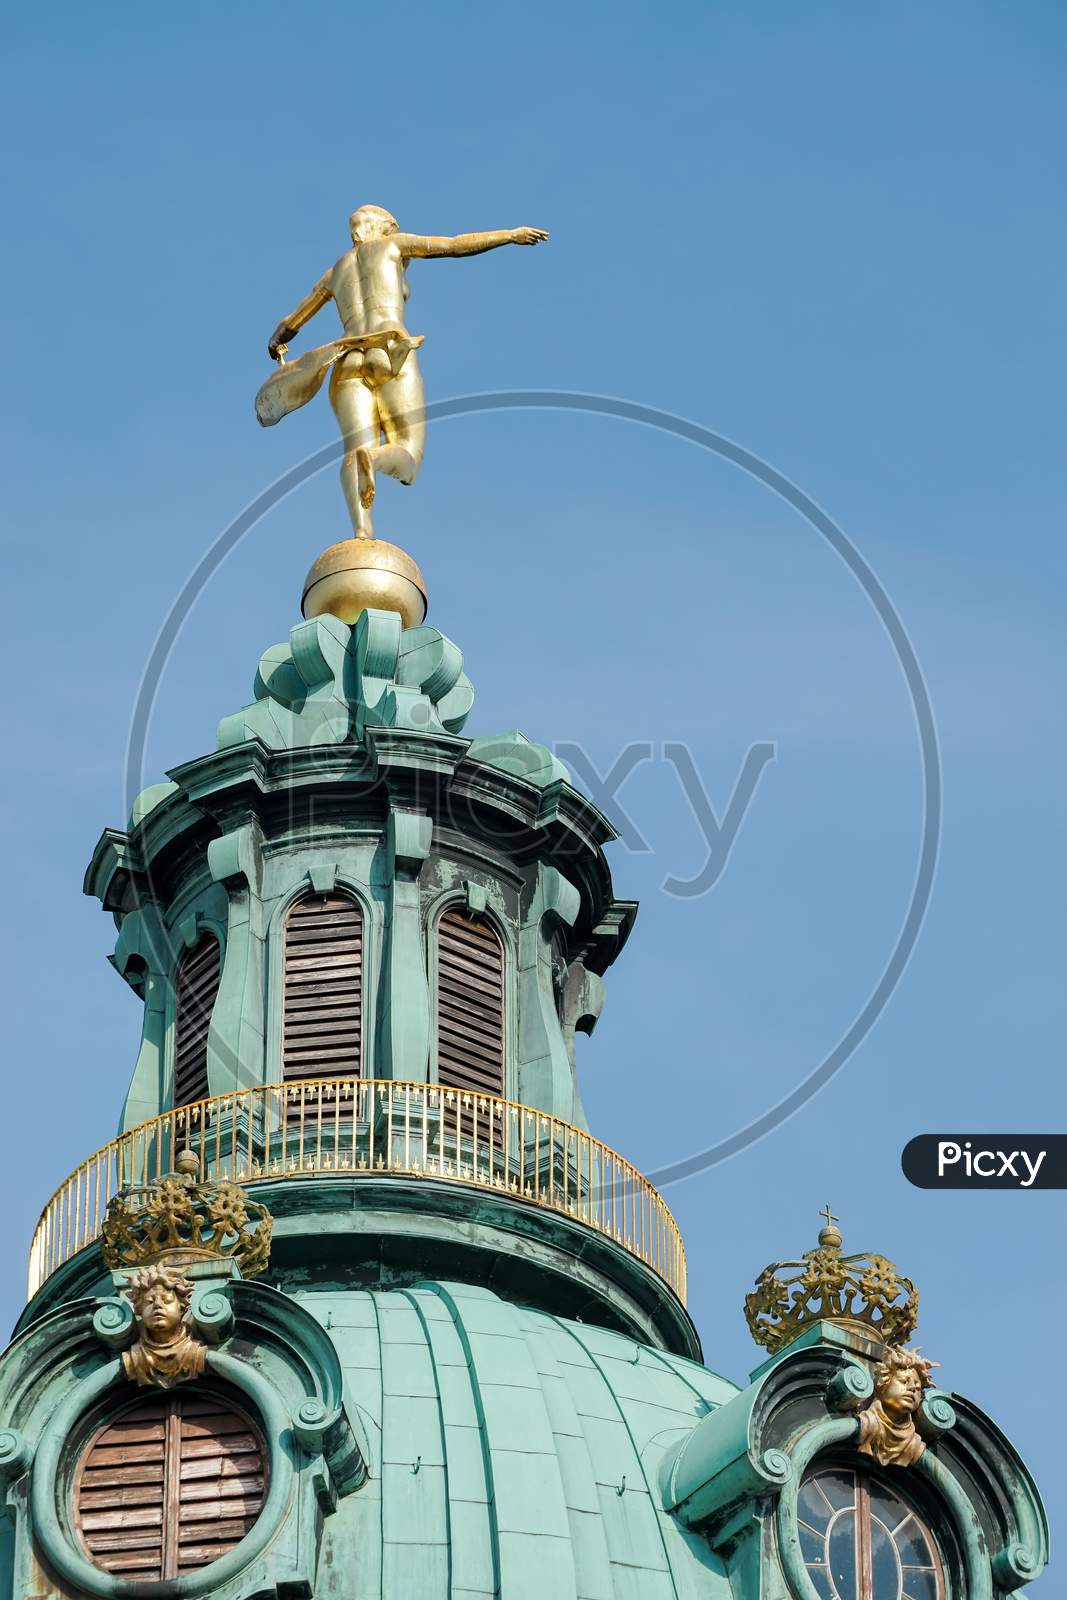 Statue Of Fotuna On Top Of The Charlottenburg Palace In Berlin